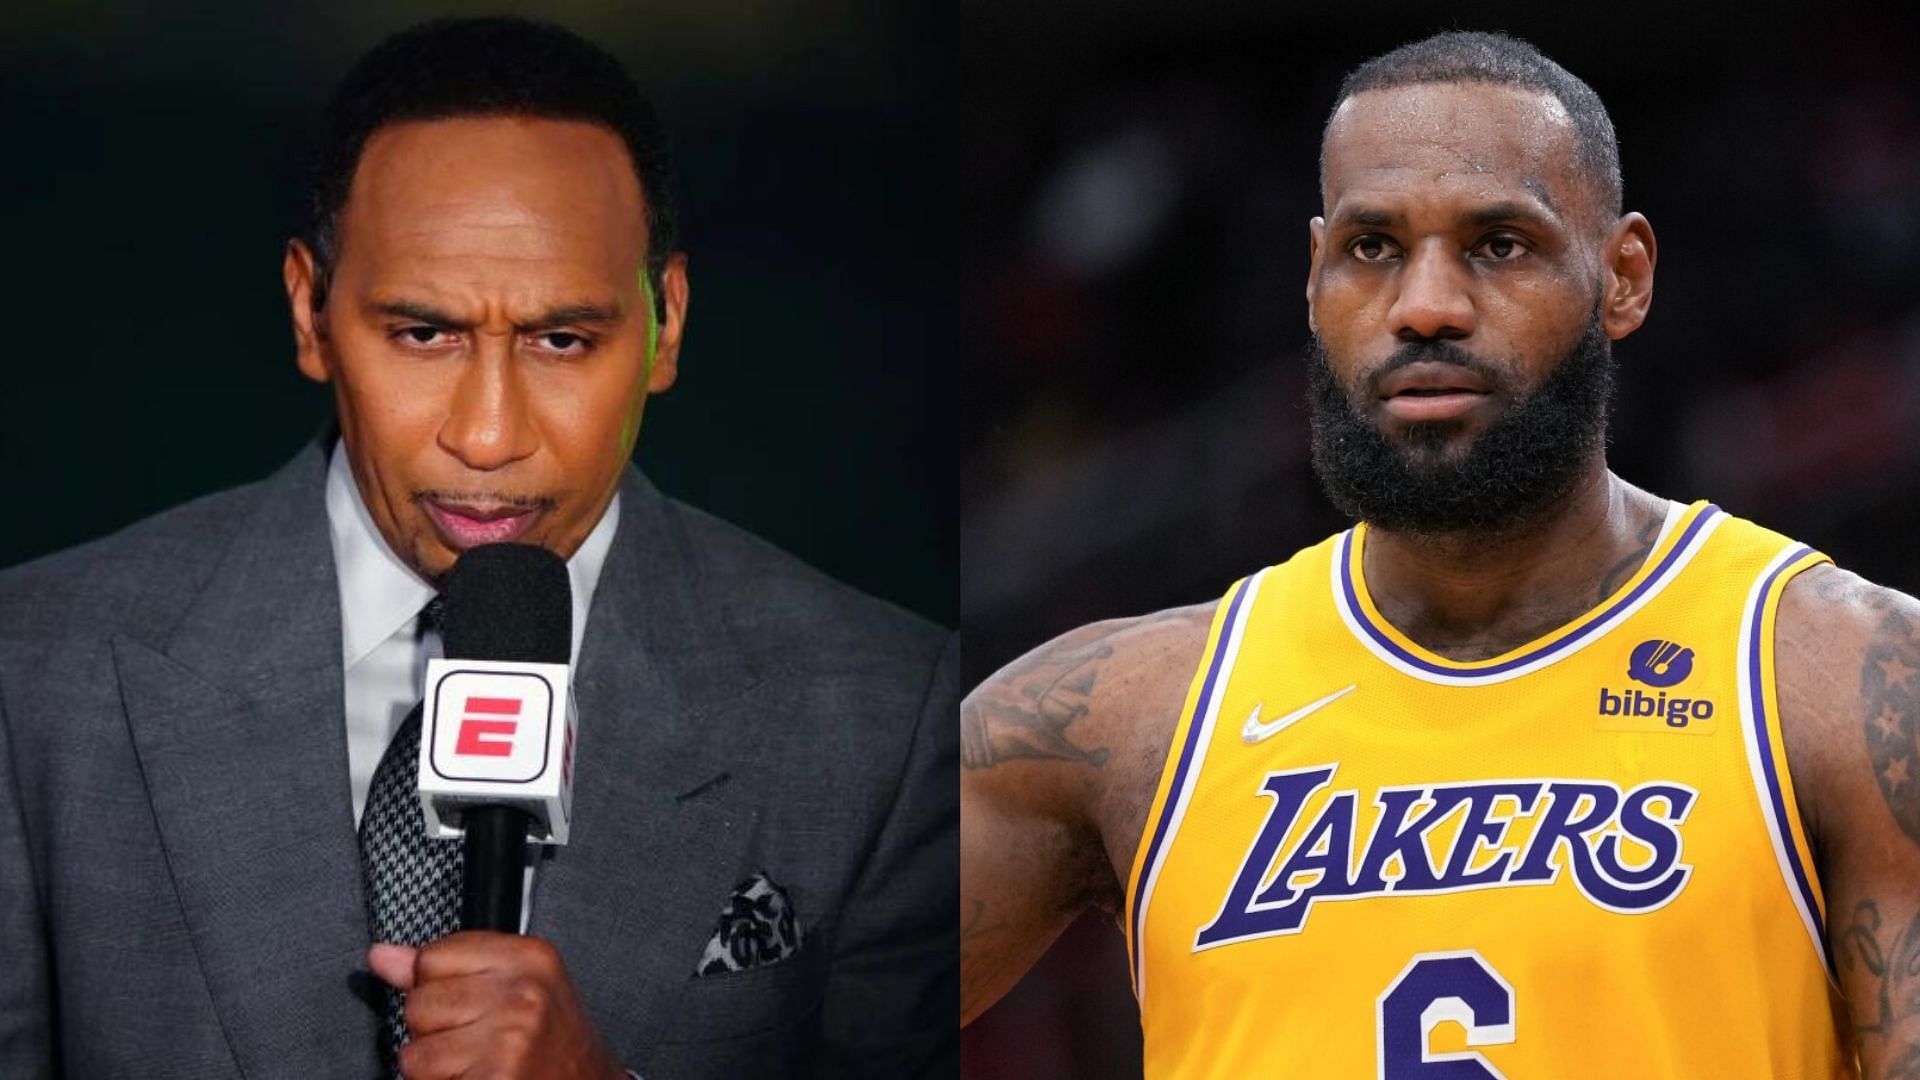 Stephen A. Smith suggests trading LeBron James